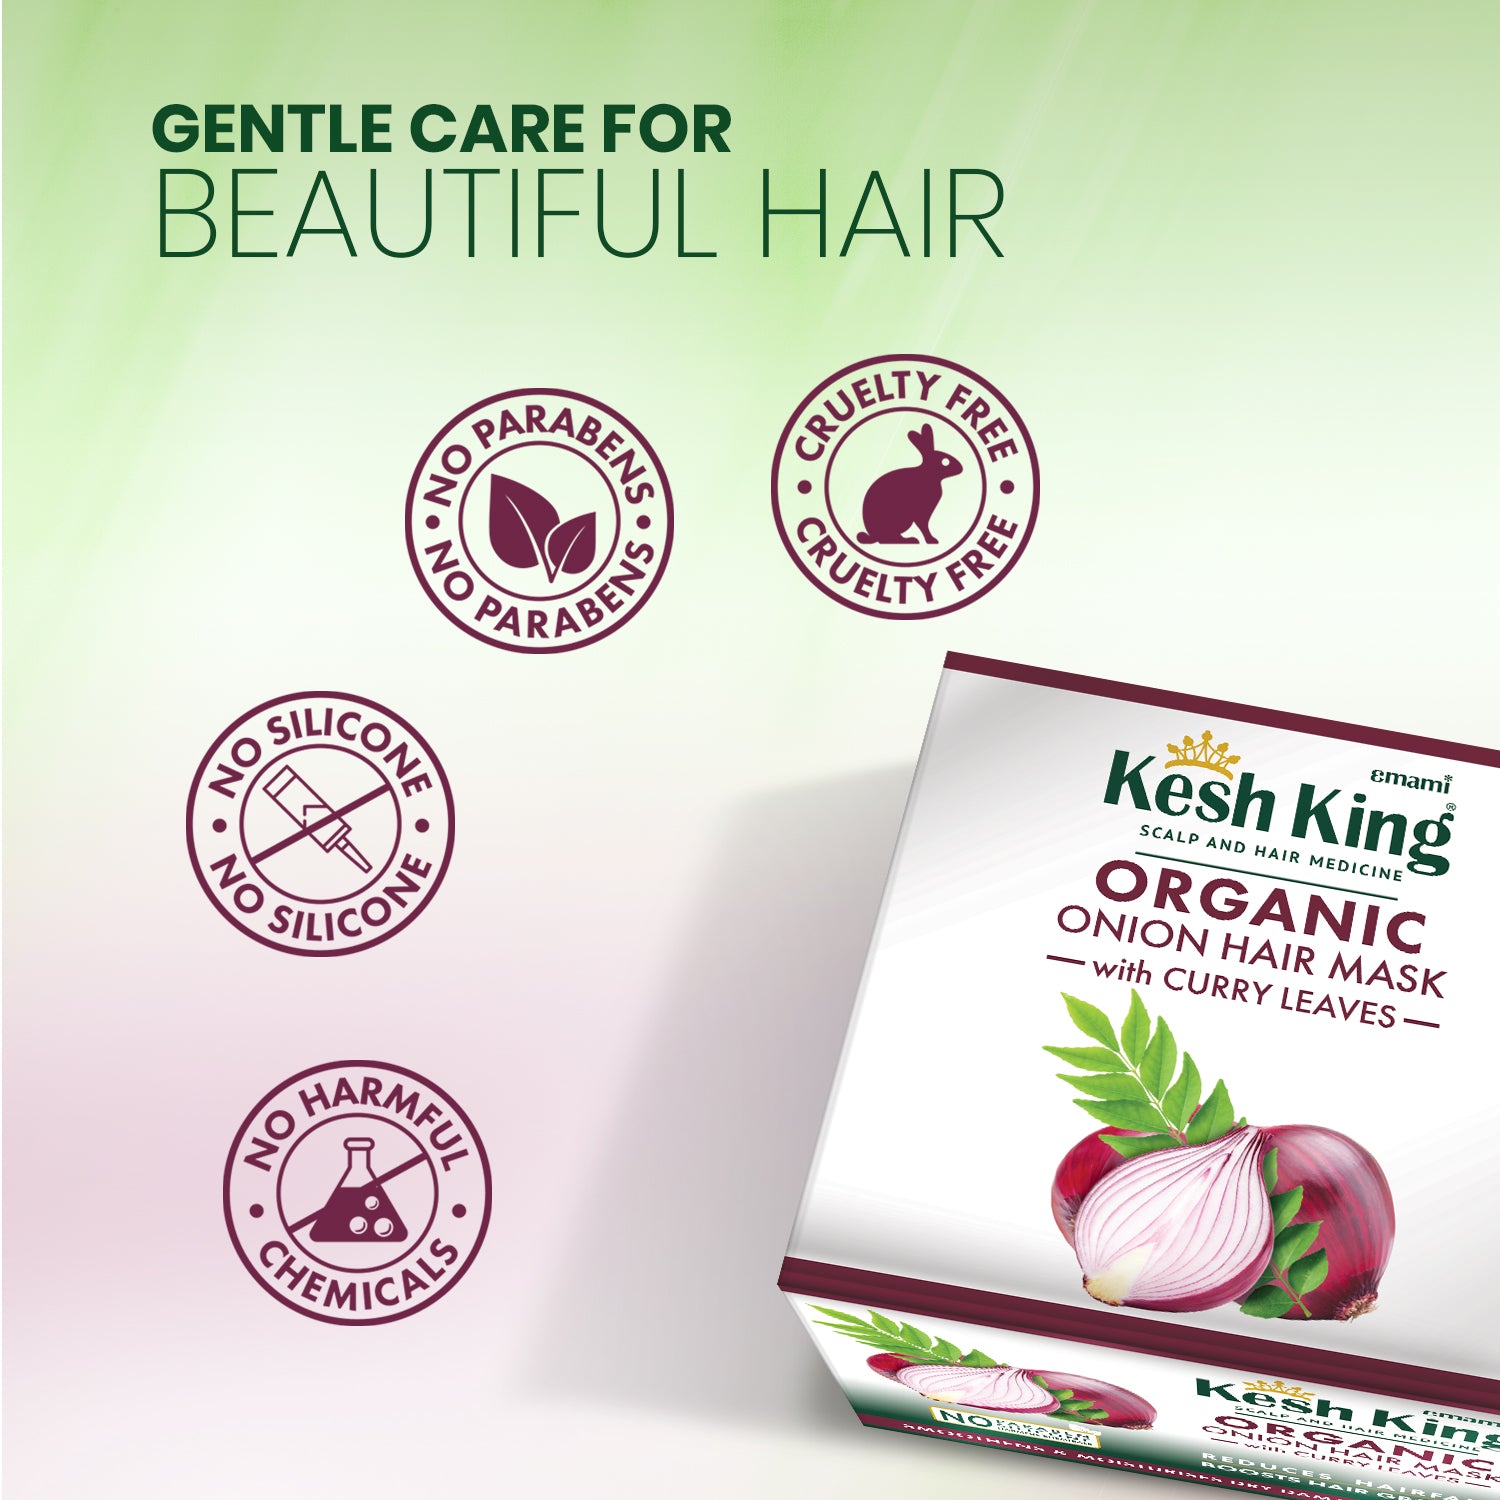 Kesh King Organic Onion Hair Mask With Curry Leaves - 200ml